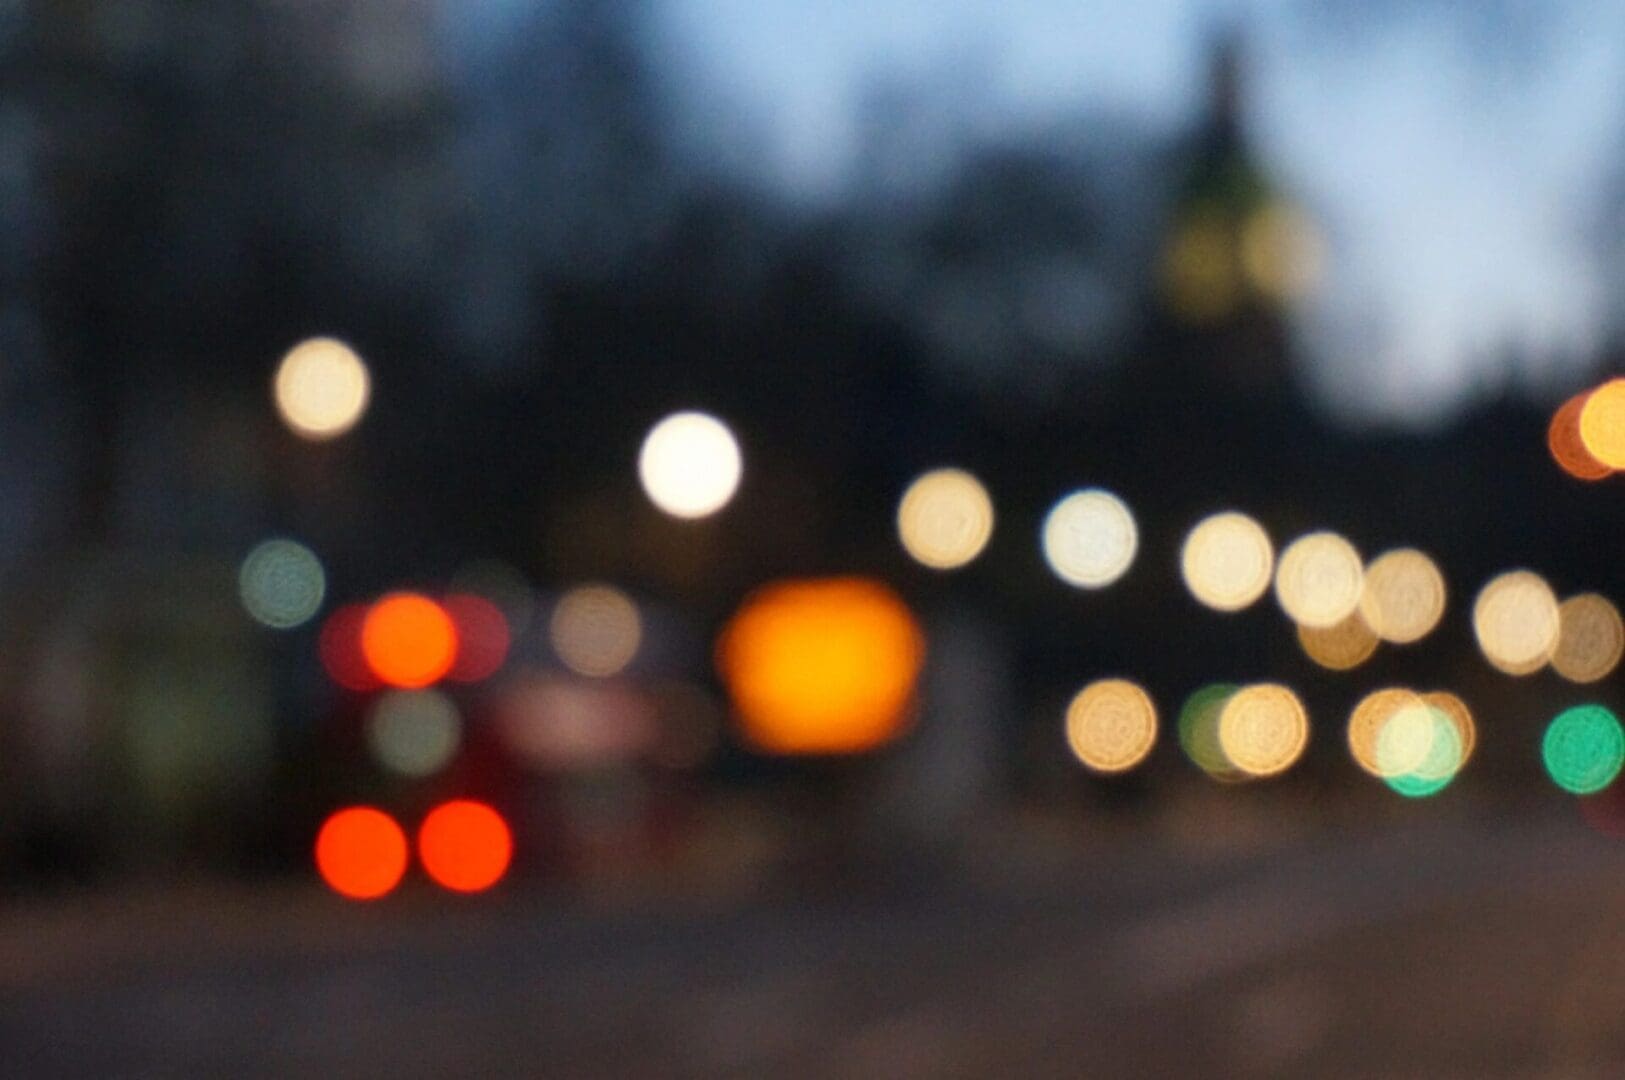 A blurred image of city lights at dusk or night.